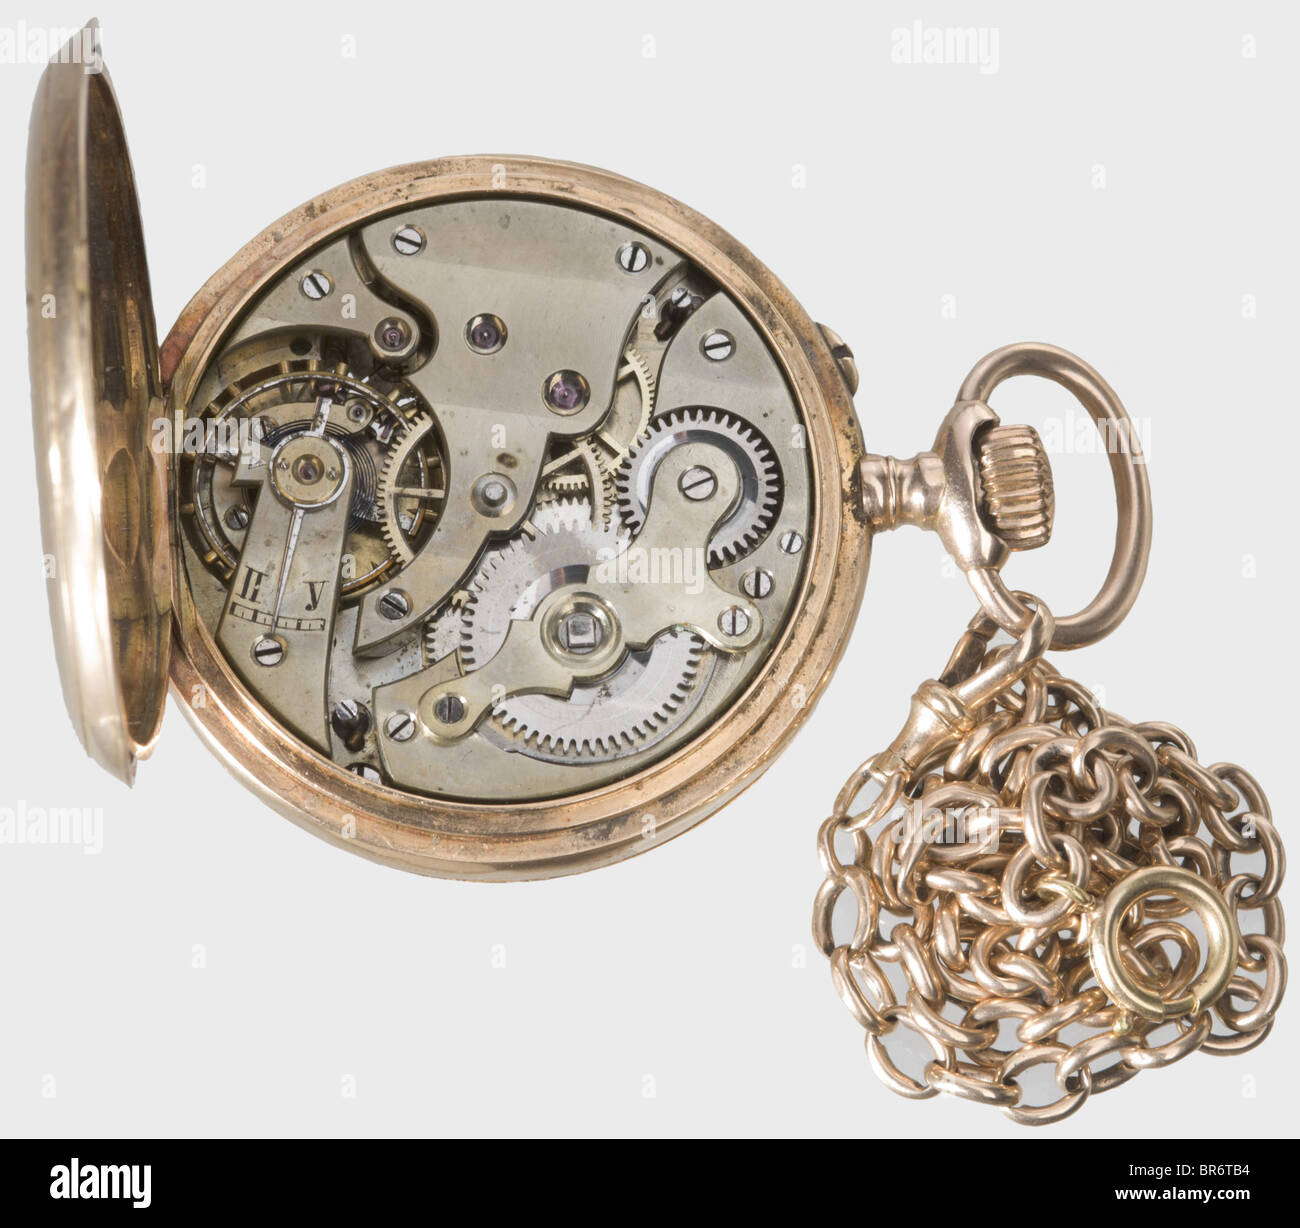 A golden savonette pocket watch with Imperial Russian double-headed eagle, Pavel Bure, Court Watch Maker to the Imperial House. The lid bears the Tsarist double eagle partially enamelled in blue and black. White enamel dial (fissures) with gold hands, black Roman and Arabic numerals, as well as small second. Working, jewelled precision movement. Engraved on the back with serial number '203521', and mark of fineness '0,583'. Golden watch chain. In a damaged red leather case with a gilt eagle on the lid. The maker's mark is stamped in gold on the silk lining. his, Stock Photo